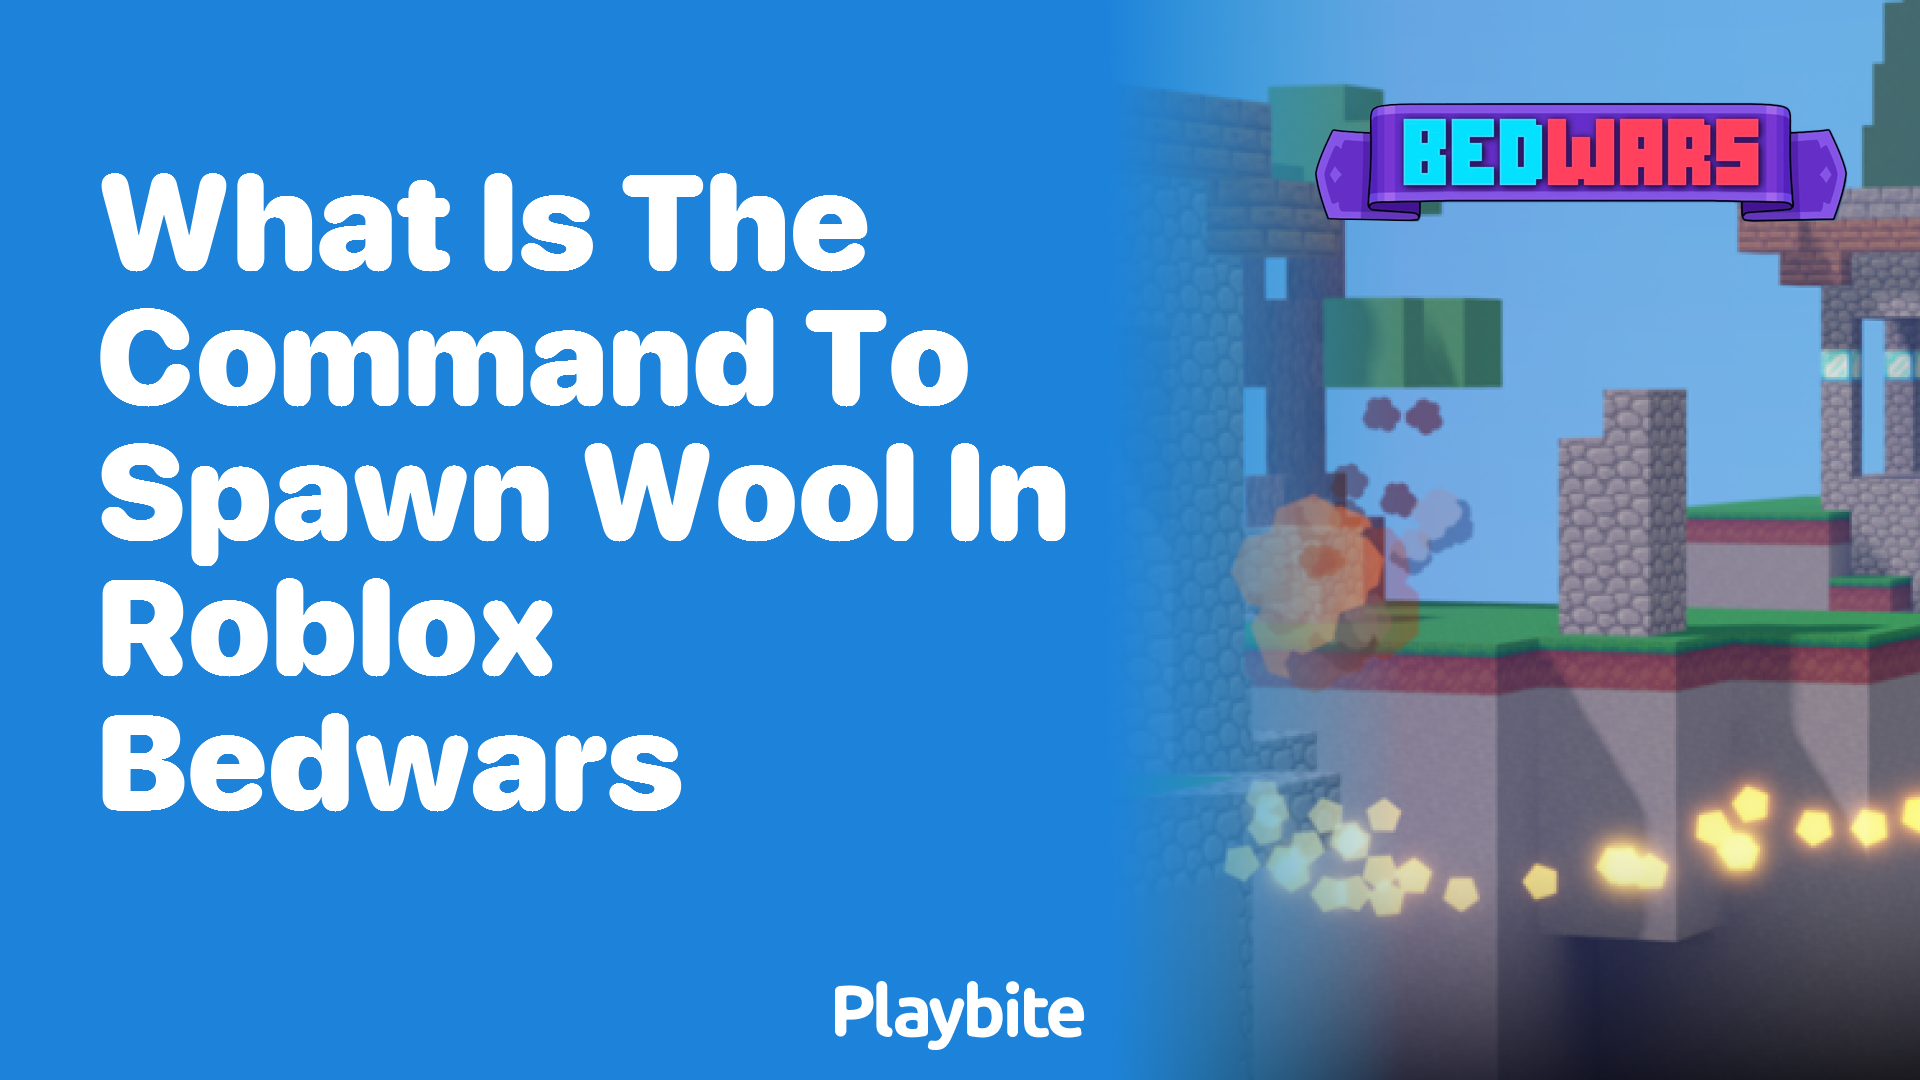 What is the Command to Spawn Wool in Roblox Bedwars?